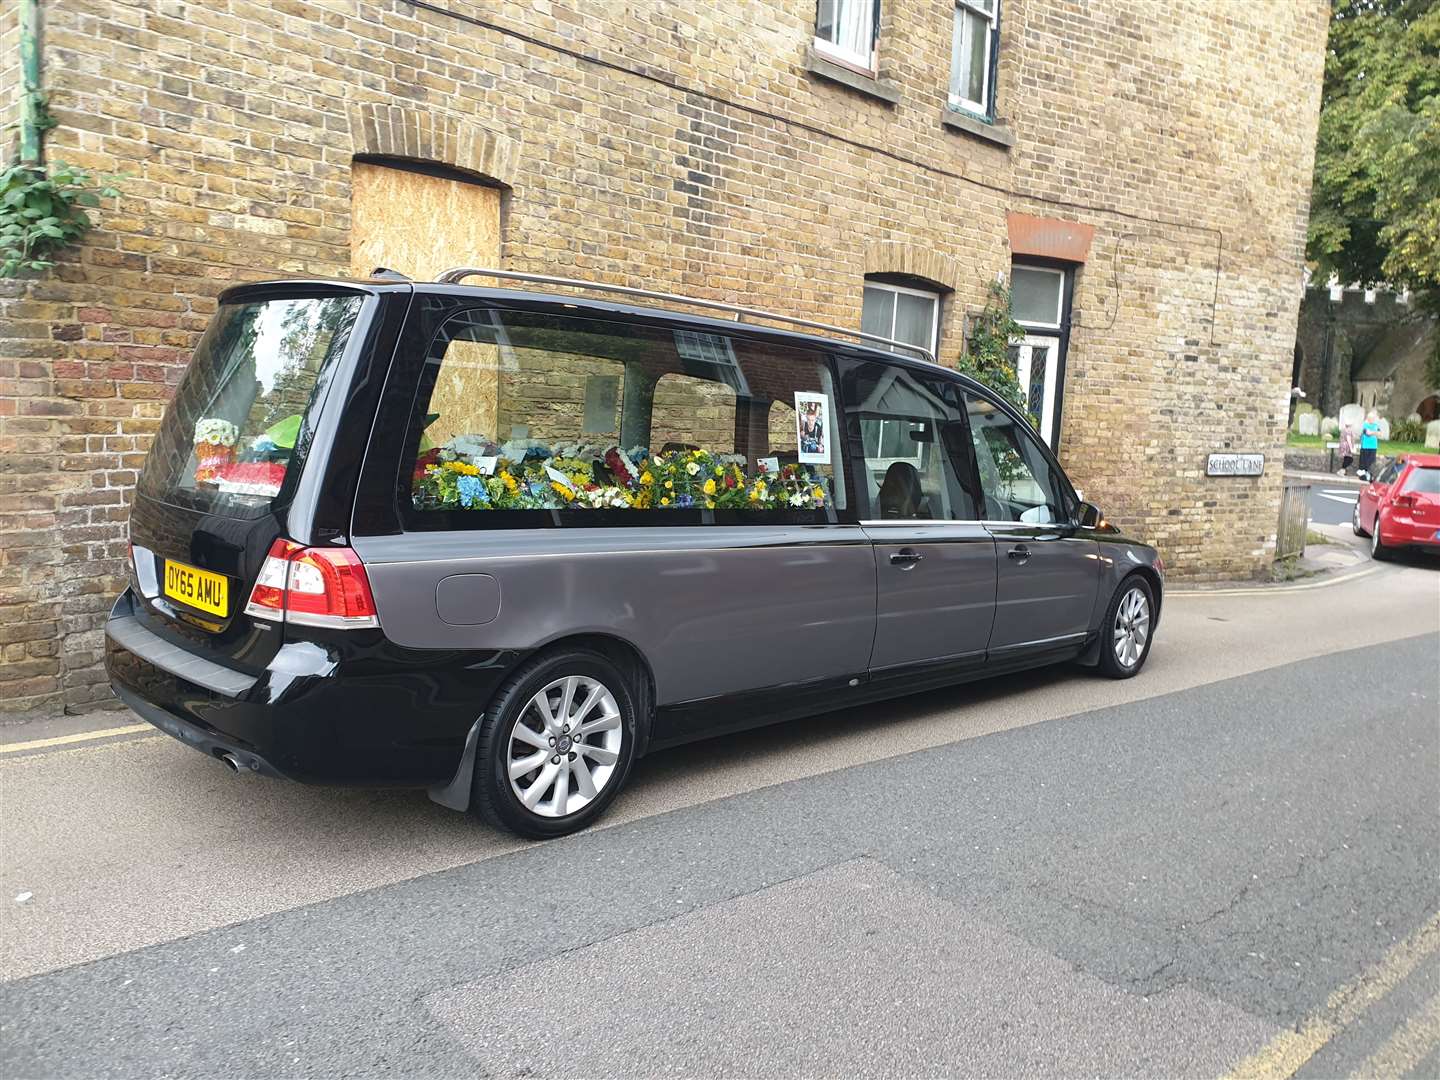 One of the vehicles involved in the procession parked up near St Martin's Church in Herne